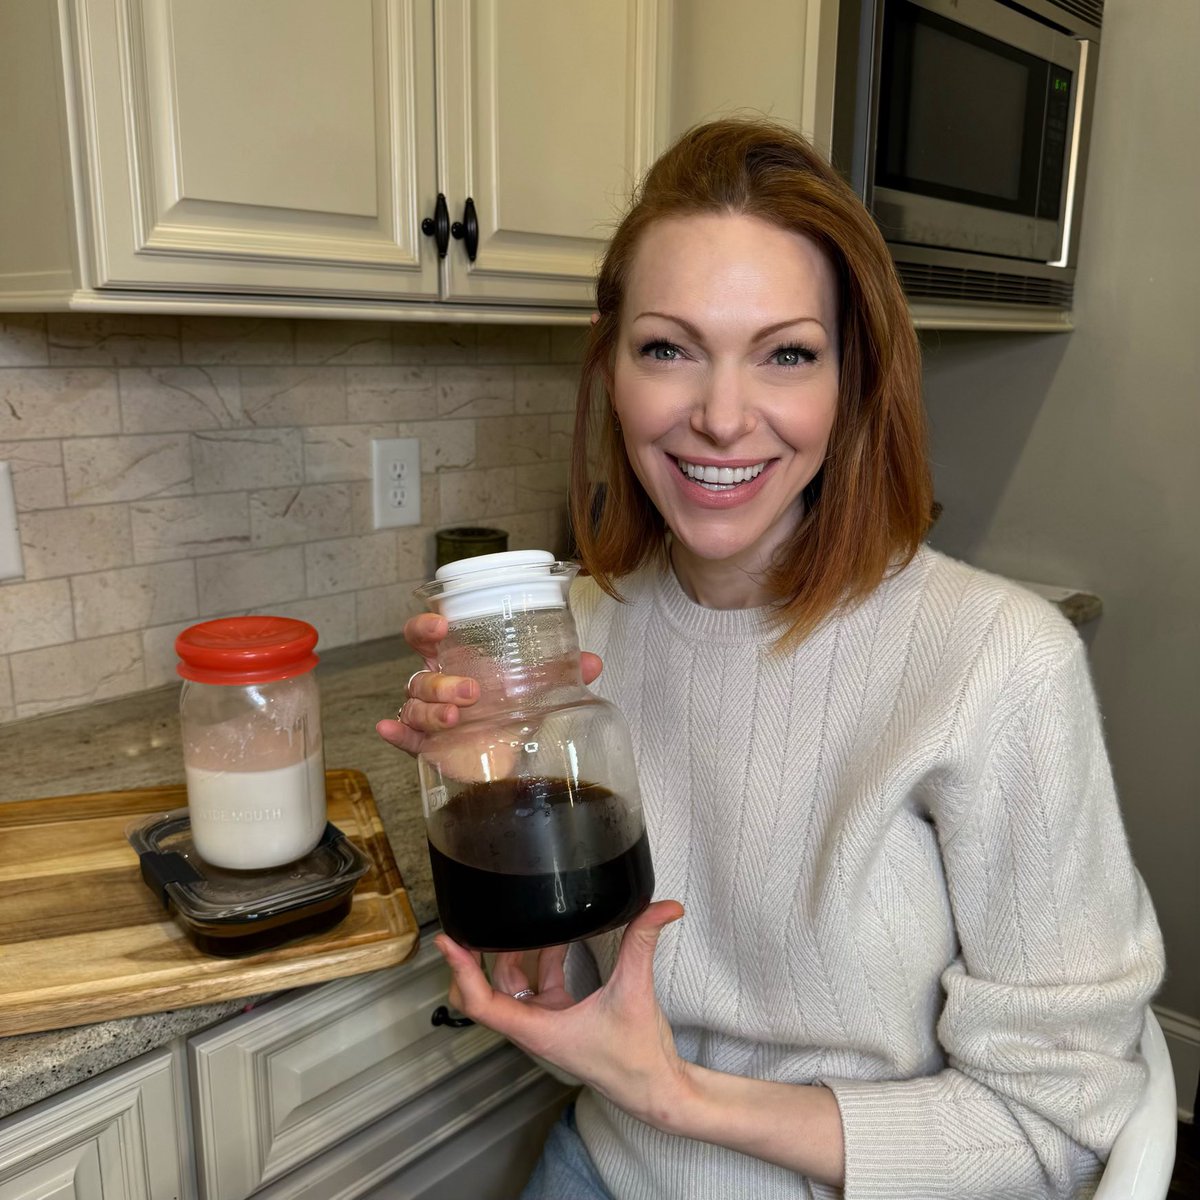 #GetYourPrepOn by making a batch of cold brew at home with @LauraPrepon! Check out her IG reels to see how she does it… #PrepOn